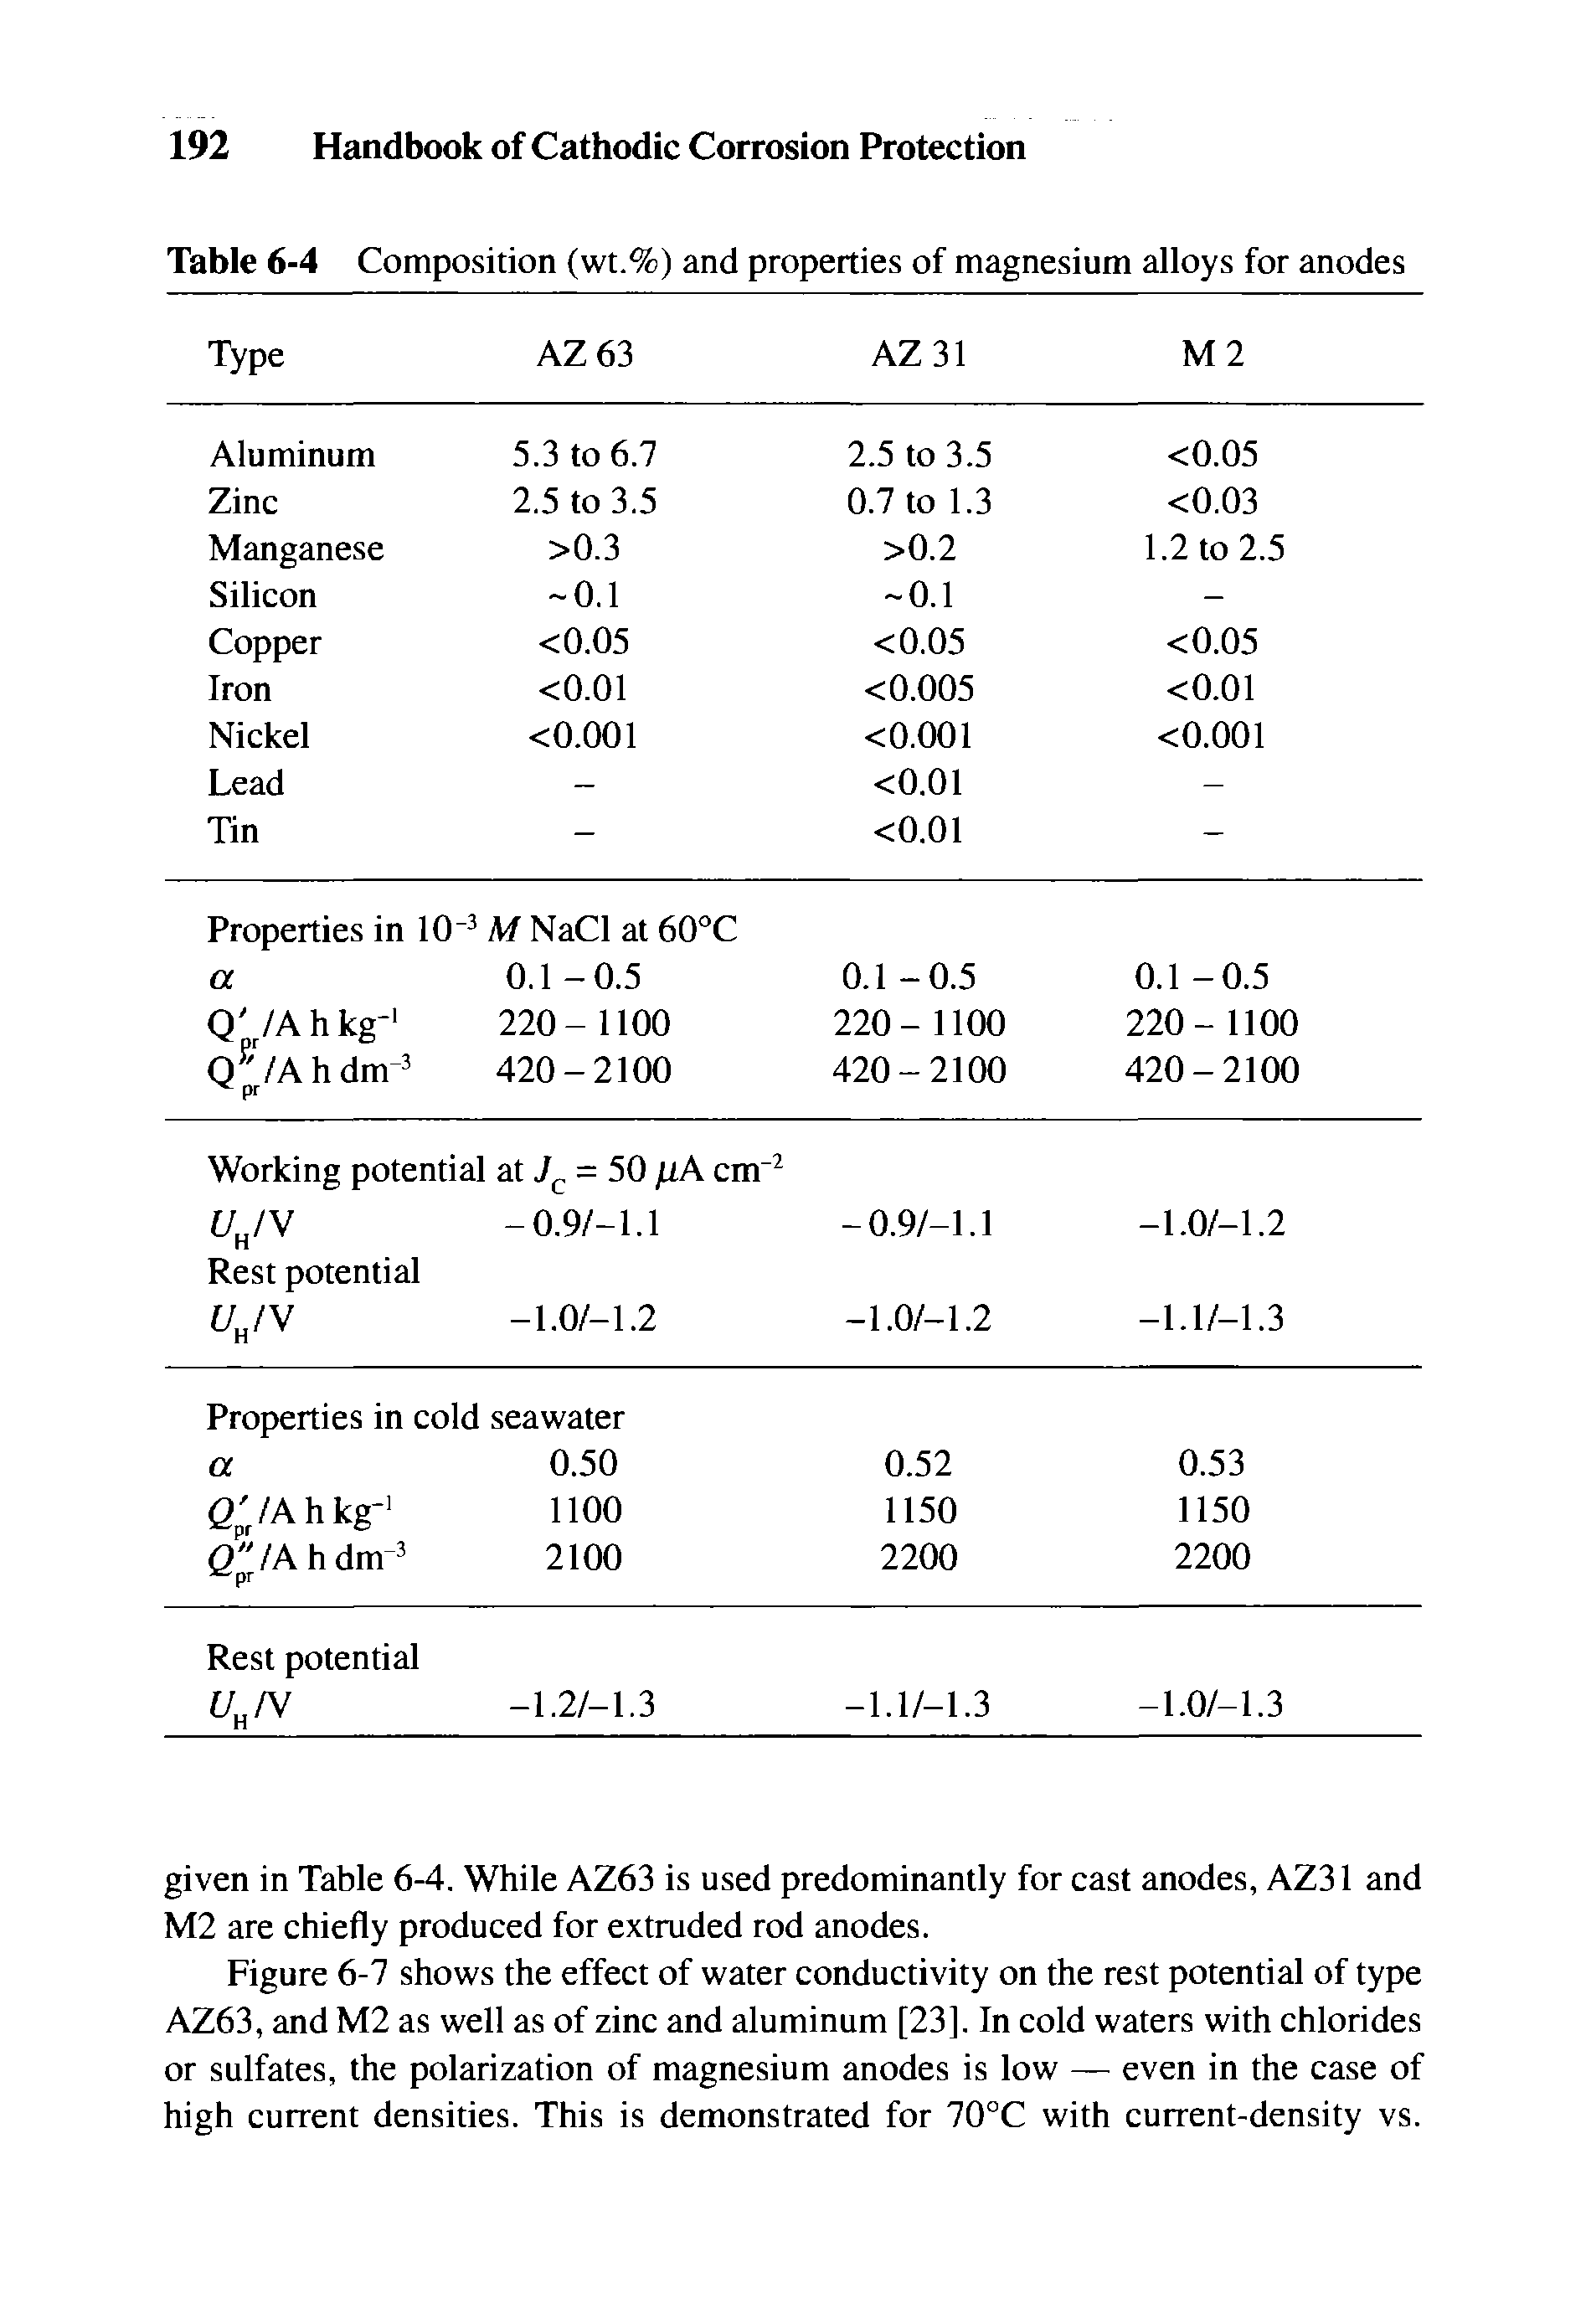 Table 6-4 Composition (wt.%) and properties of magnesium alloys for anodes...